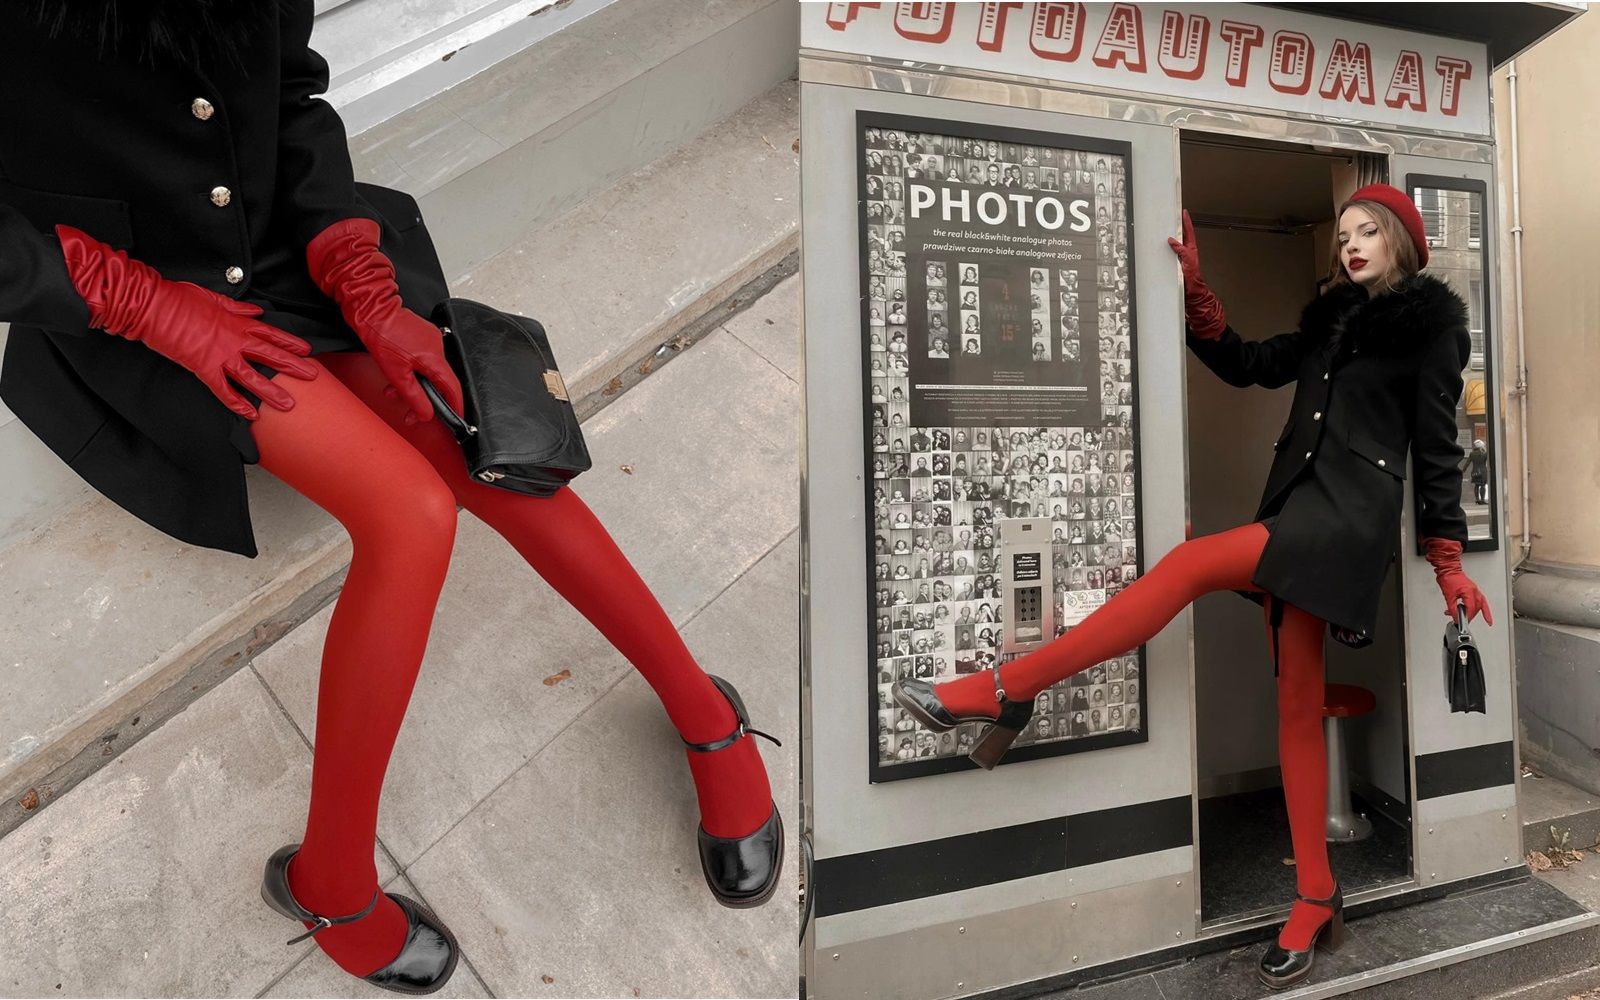 Why Everyone's Wearing Red Tights and Socks Now